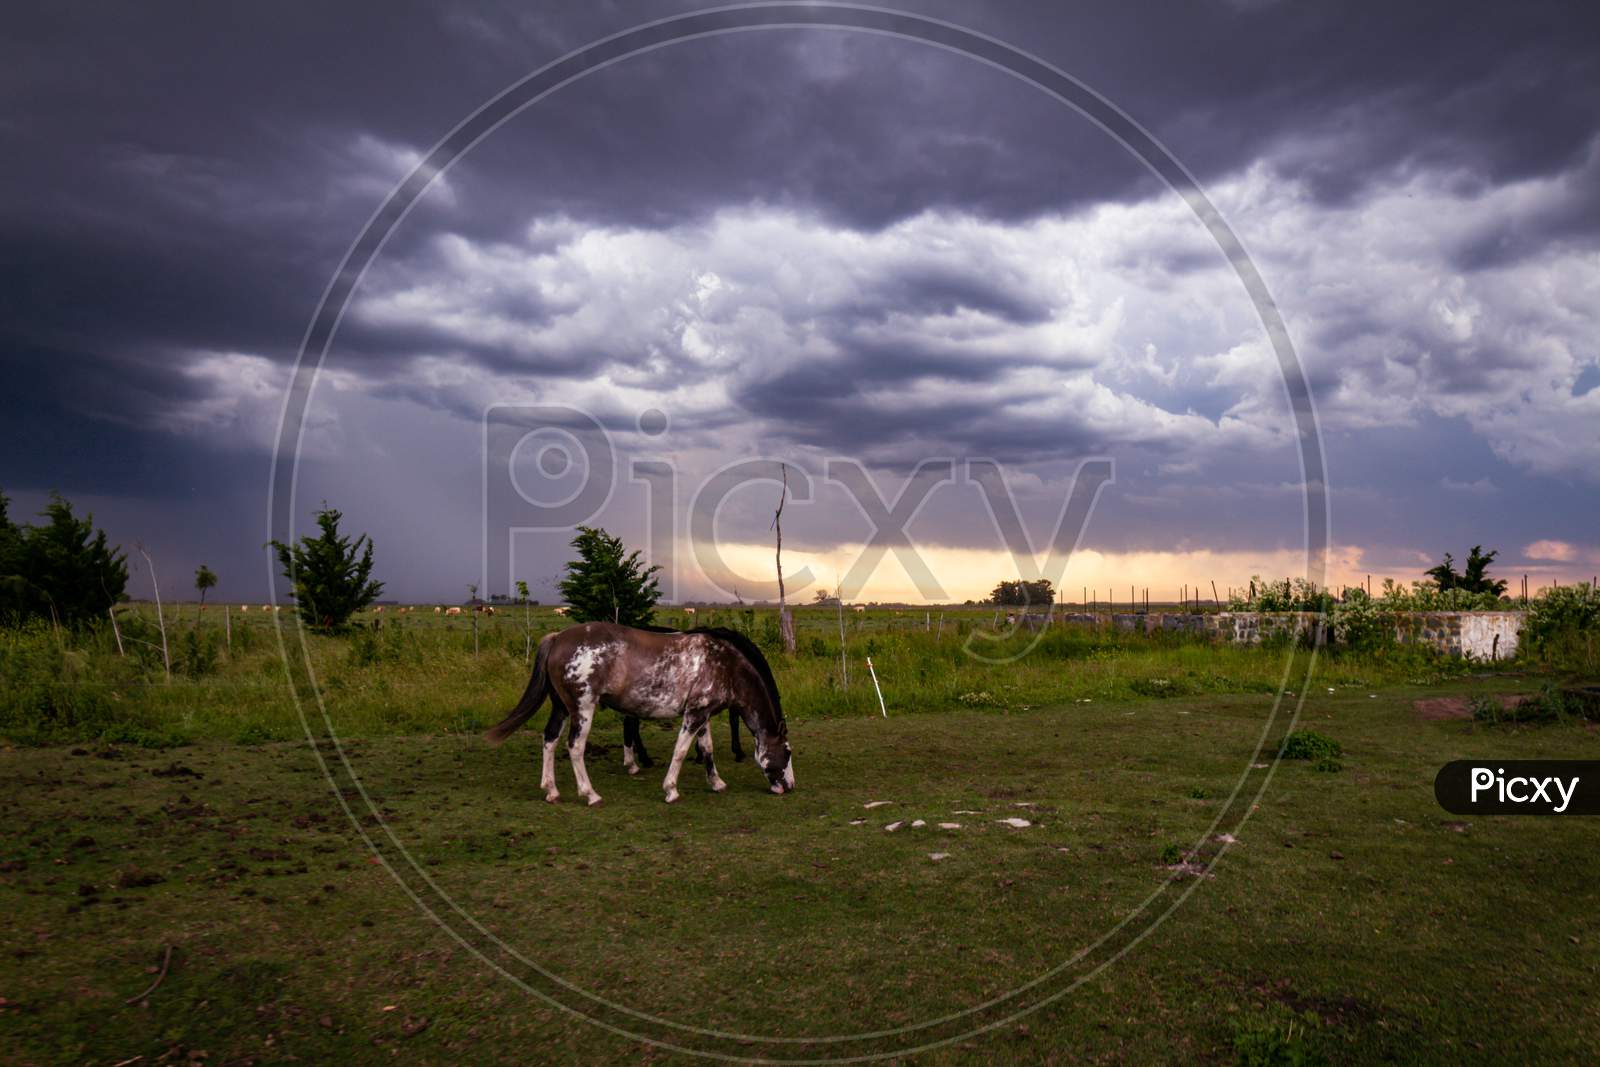 Beautiful Horses Of Brown And White Colors In The Field. Equines In Their Home On A Stormy Day.